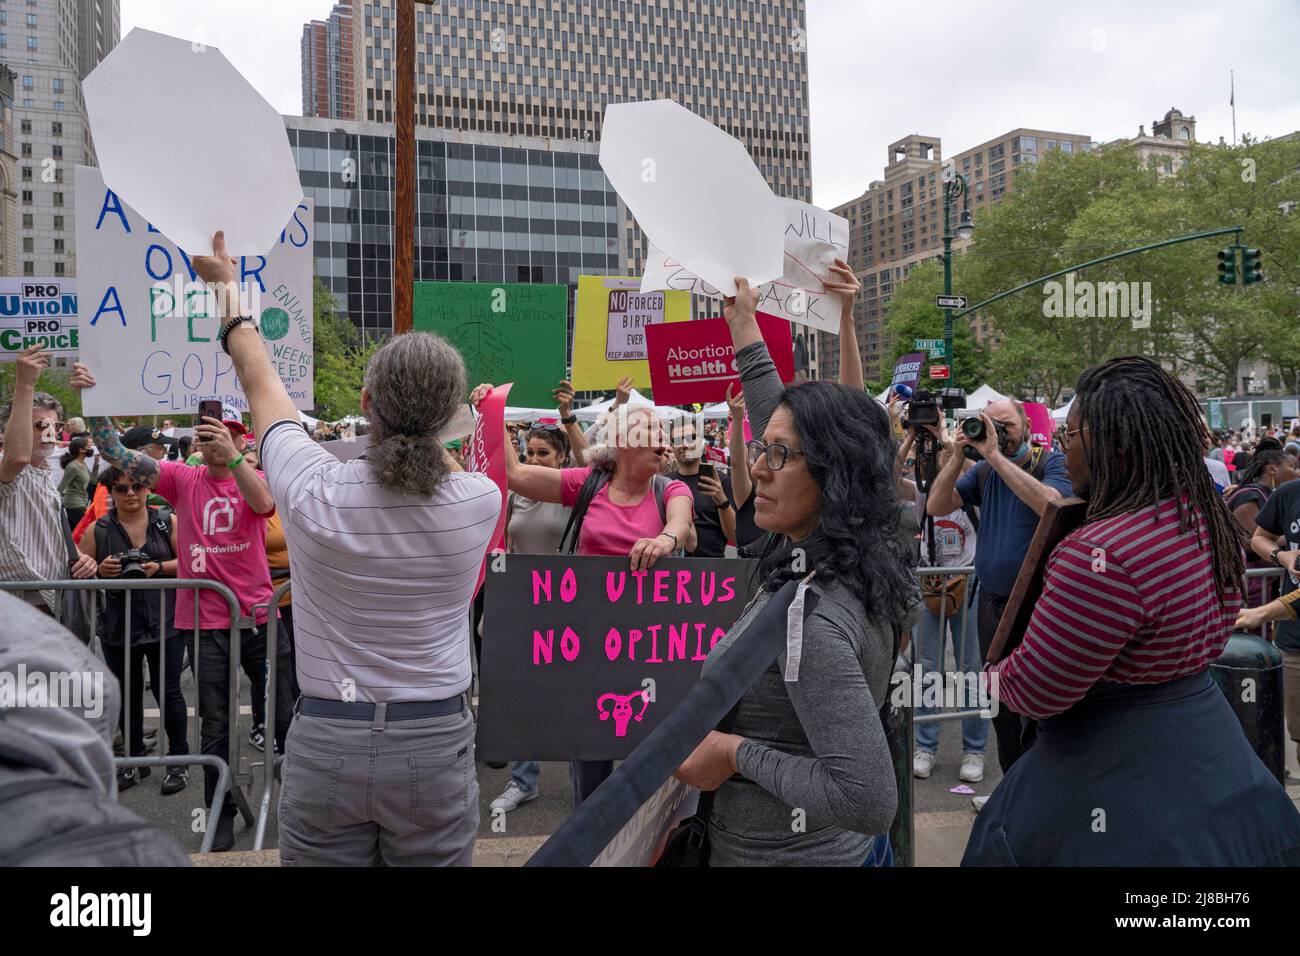 NEW YORK, NEW YOR - MAY 14: Abortion rights activists clash with Anti-Abortion activists during a Bans Off Our Bodies rally at Foley Square in Lower Manhattan on Saturday, May 14, 2022 in New York City. Abortion rights supporters are holding rallies across the country urging lawmakers to codify abortion rights into law after a leaked draft from the Supreme Court revealed a potential decision to overturn the precedent set by landmark Roe v. Wade. Stock Photo